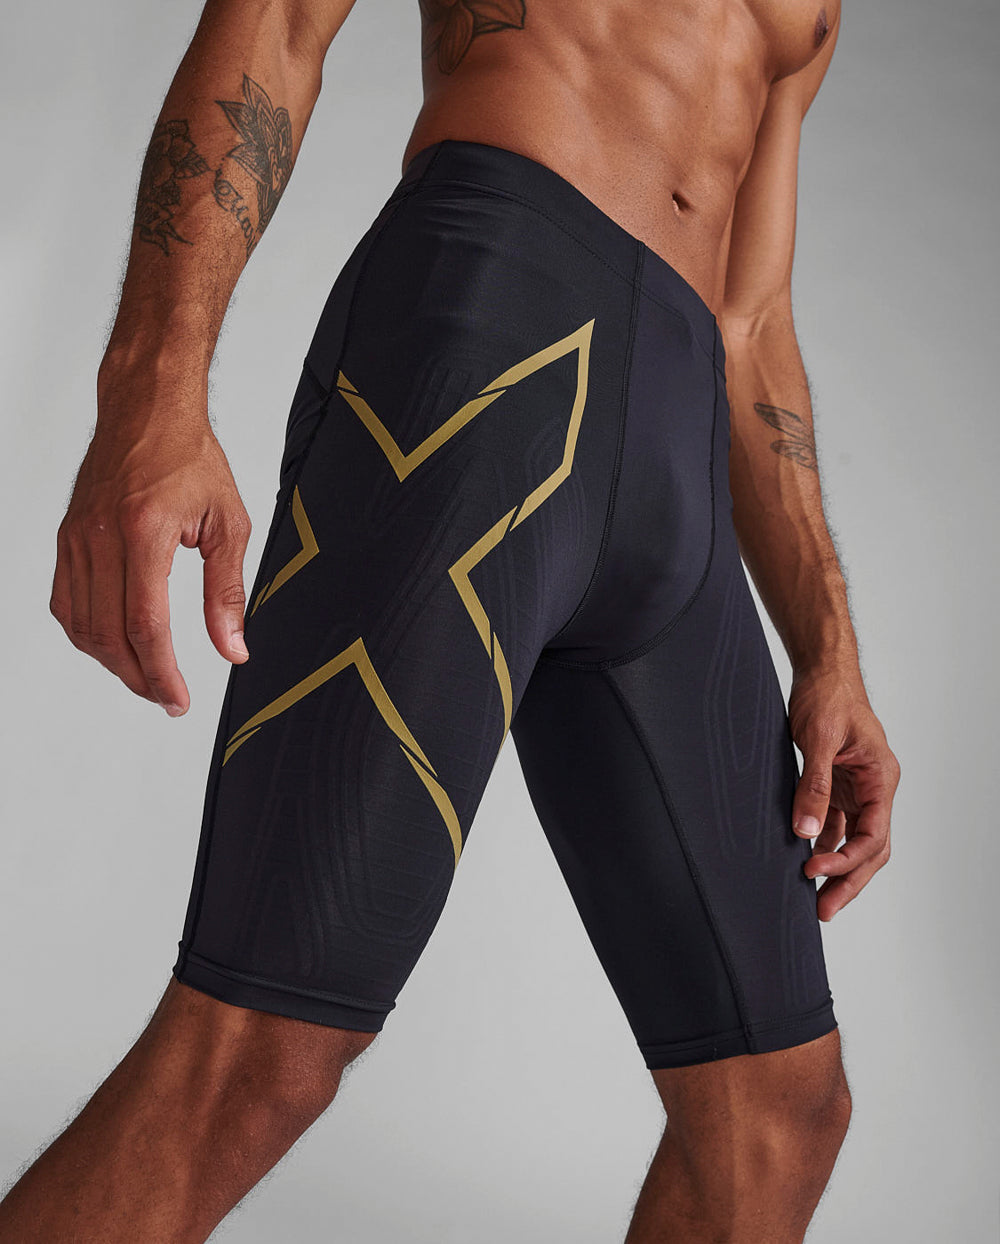 2XU Running Compression Tights Mens - Black/Outline Union Jack